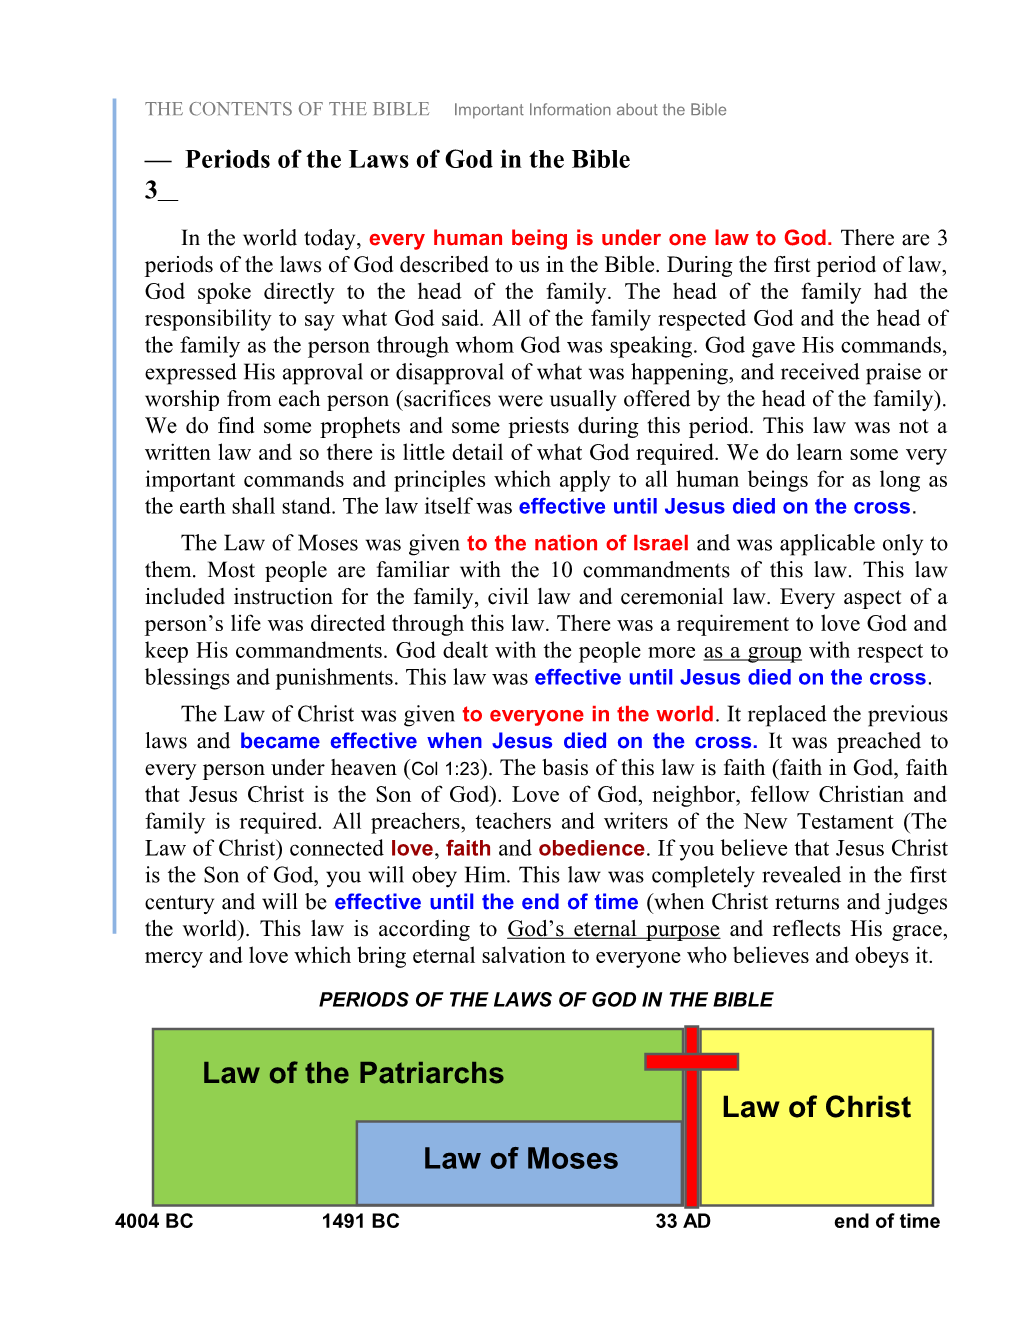 Periods of the Laws of God in the Bible